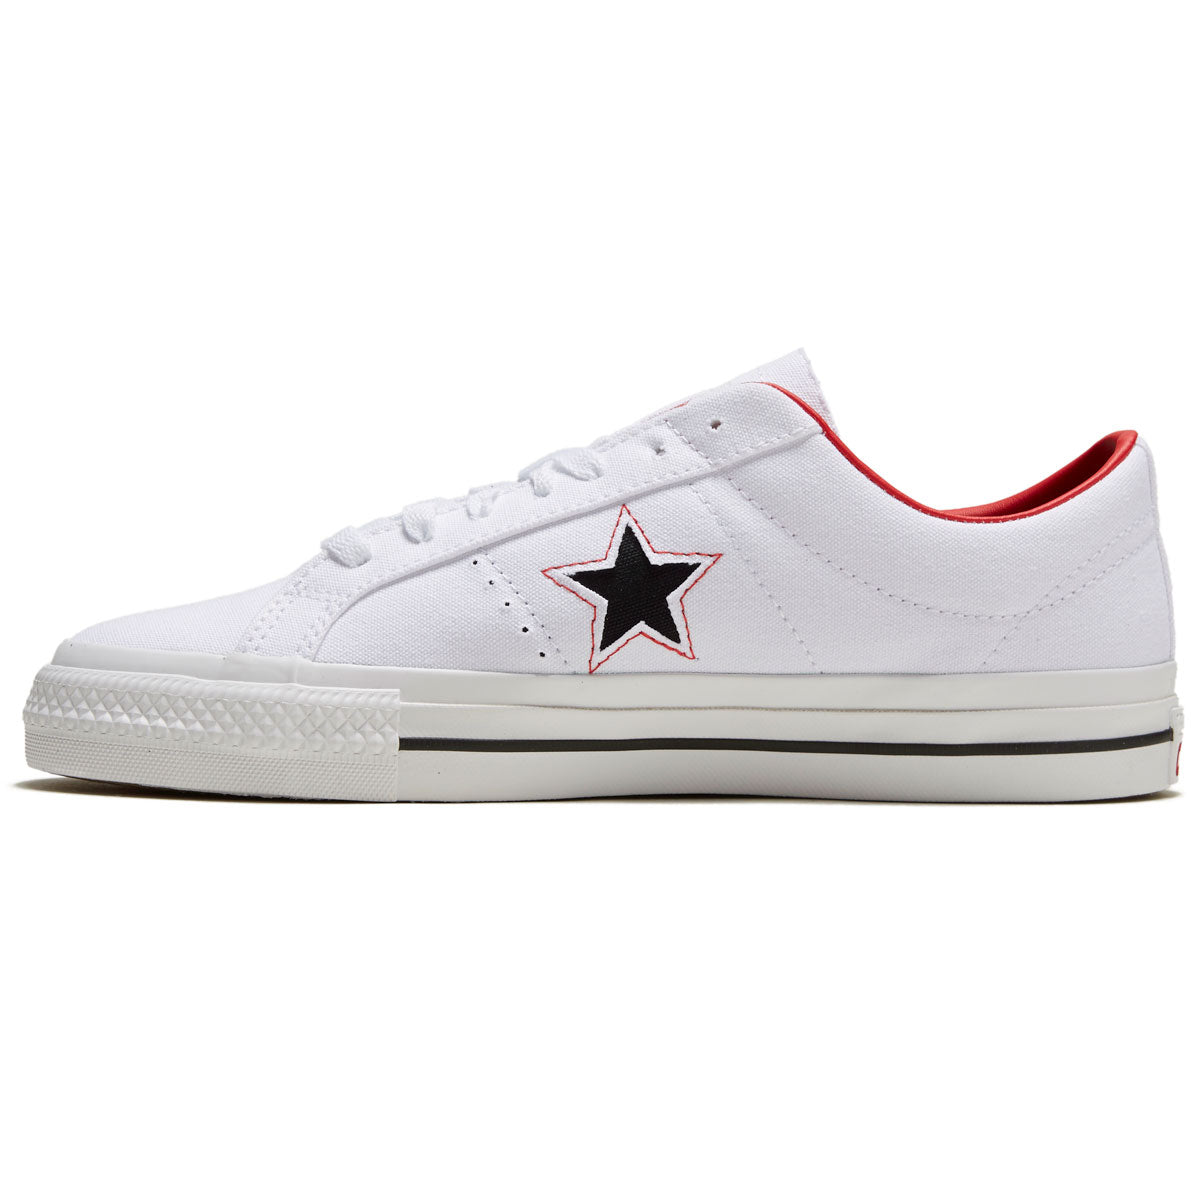 Converse One Star Pro Lips Shoes - White/Black/Red – CCS